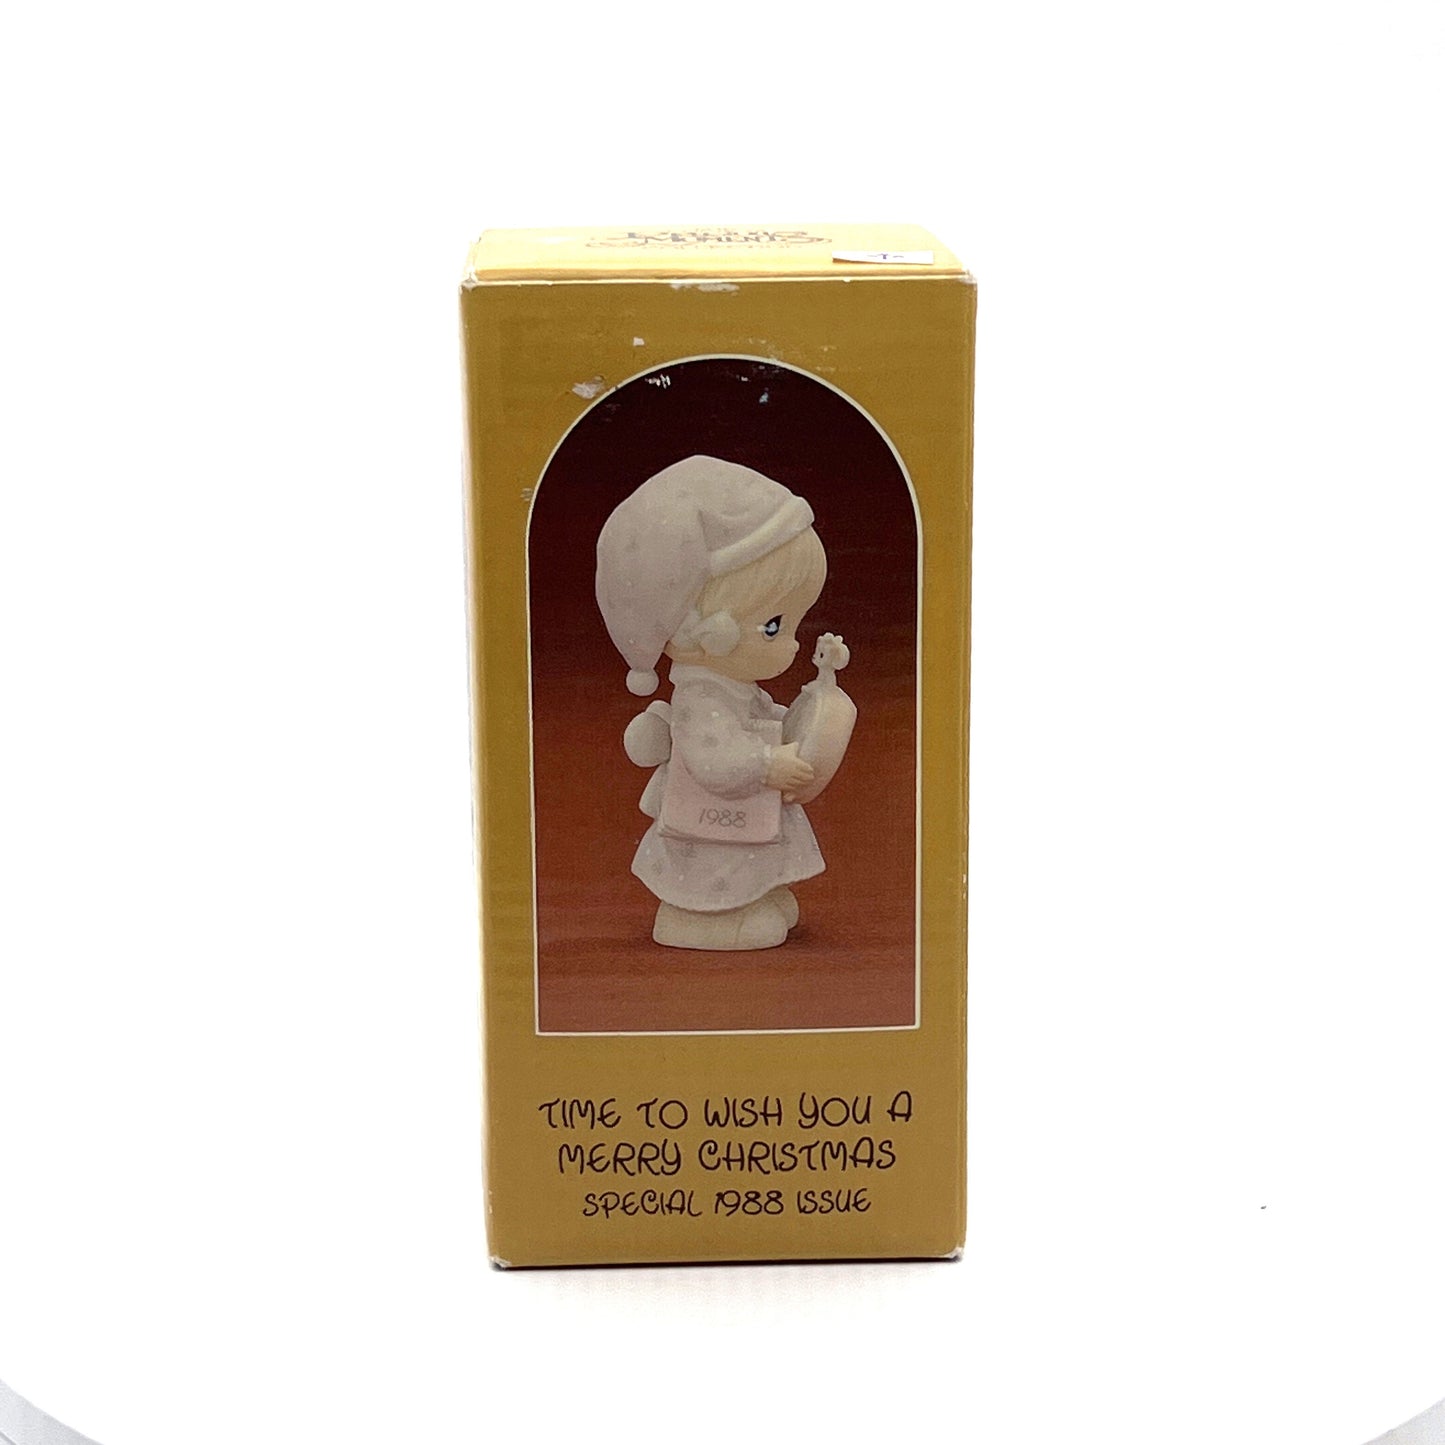 Precious Moments - Time To Wish You A Merry Christmas - 1988 - 115339 In Box